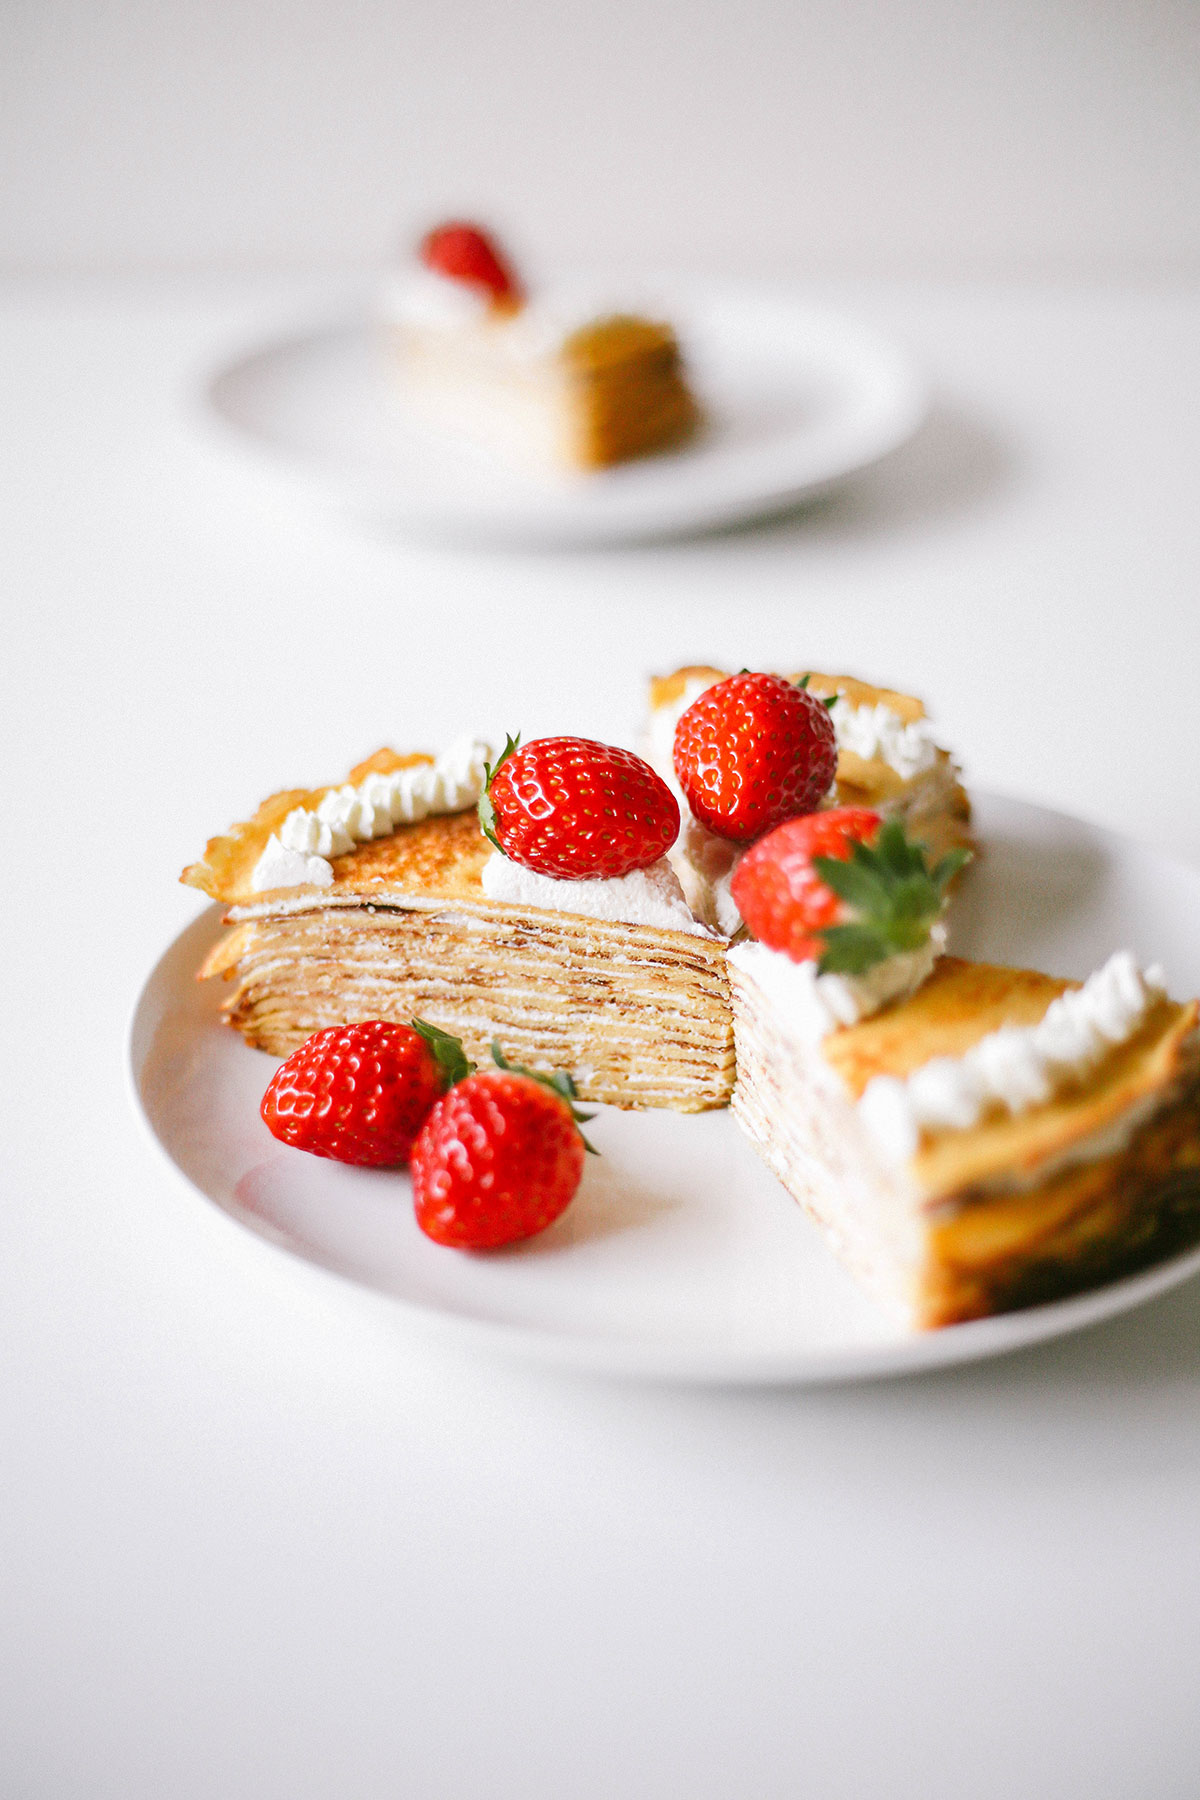 Keto crepe cake for low carb. Easy mille crepe recipe served with strawberries.